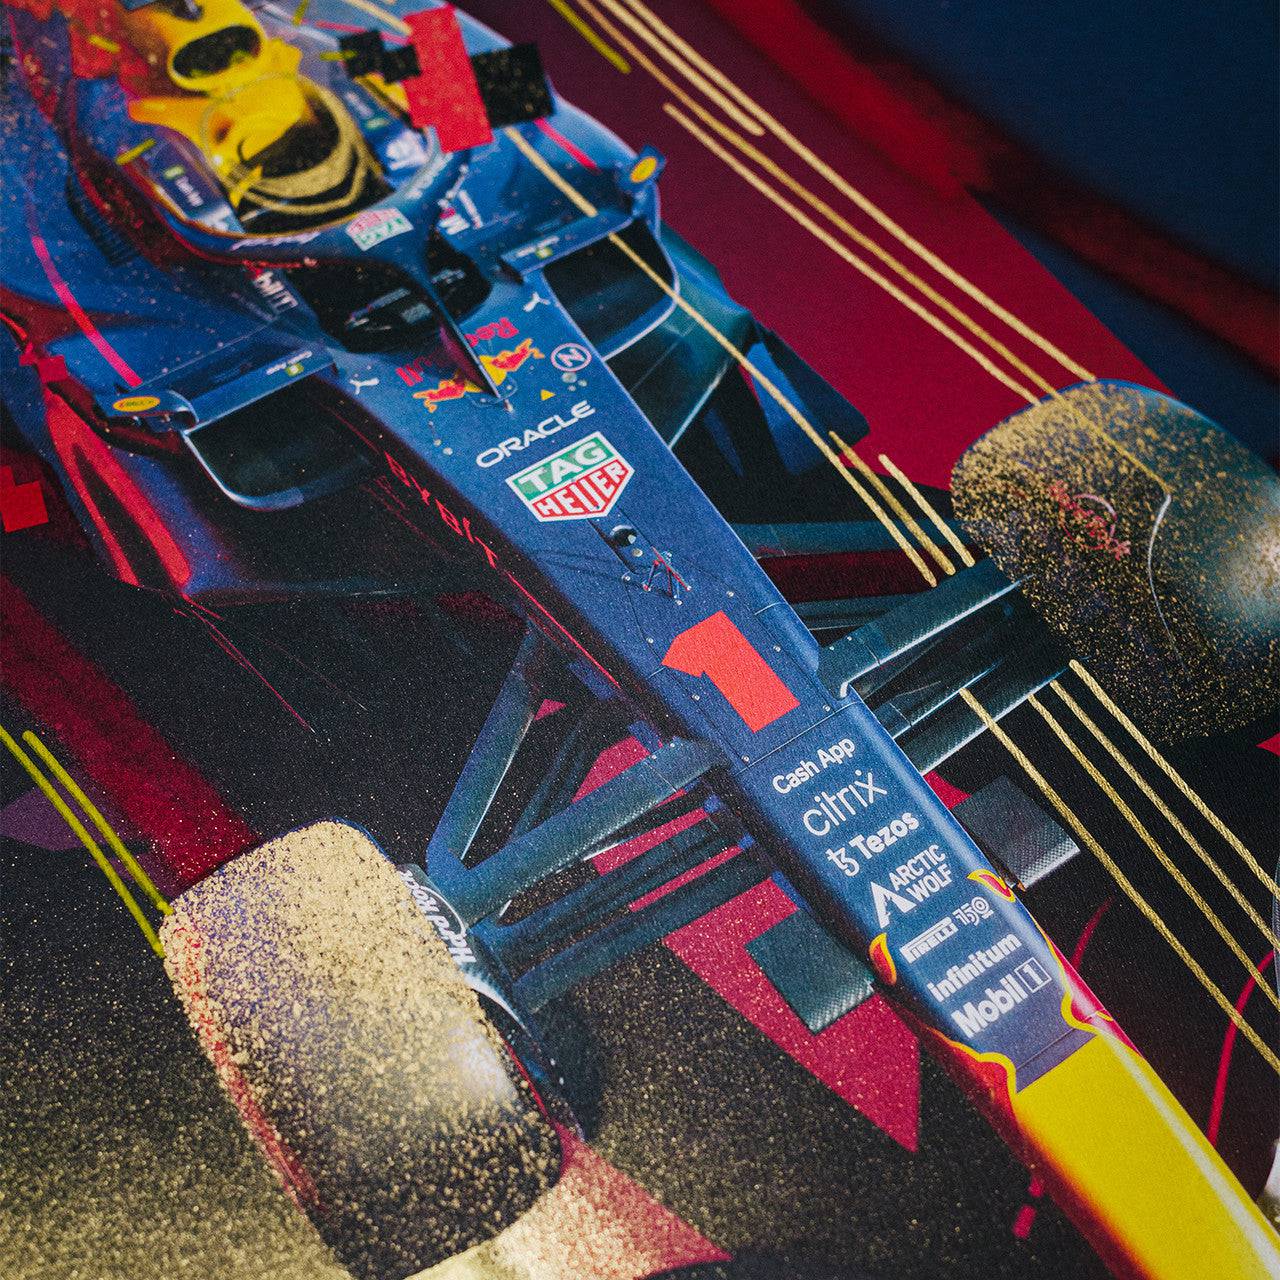 Oracle Red Bull Racing - Max Verstappen - Art to the Max - 2022 | Art Edition | #06/25